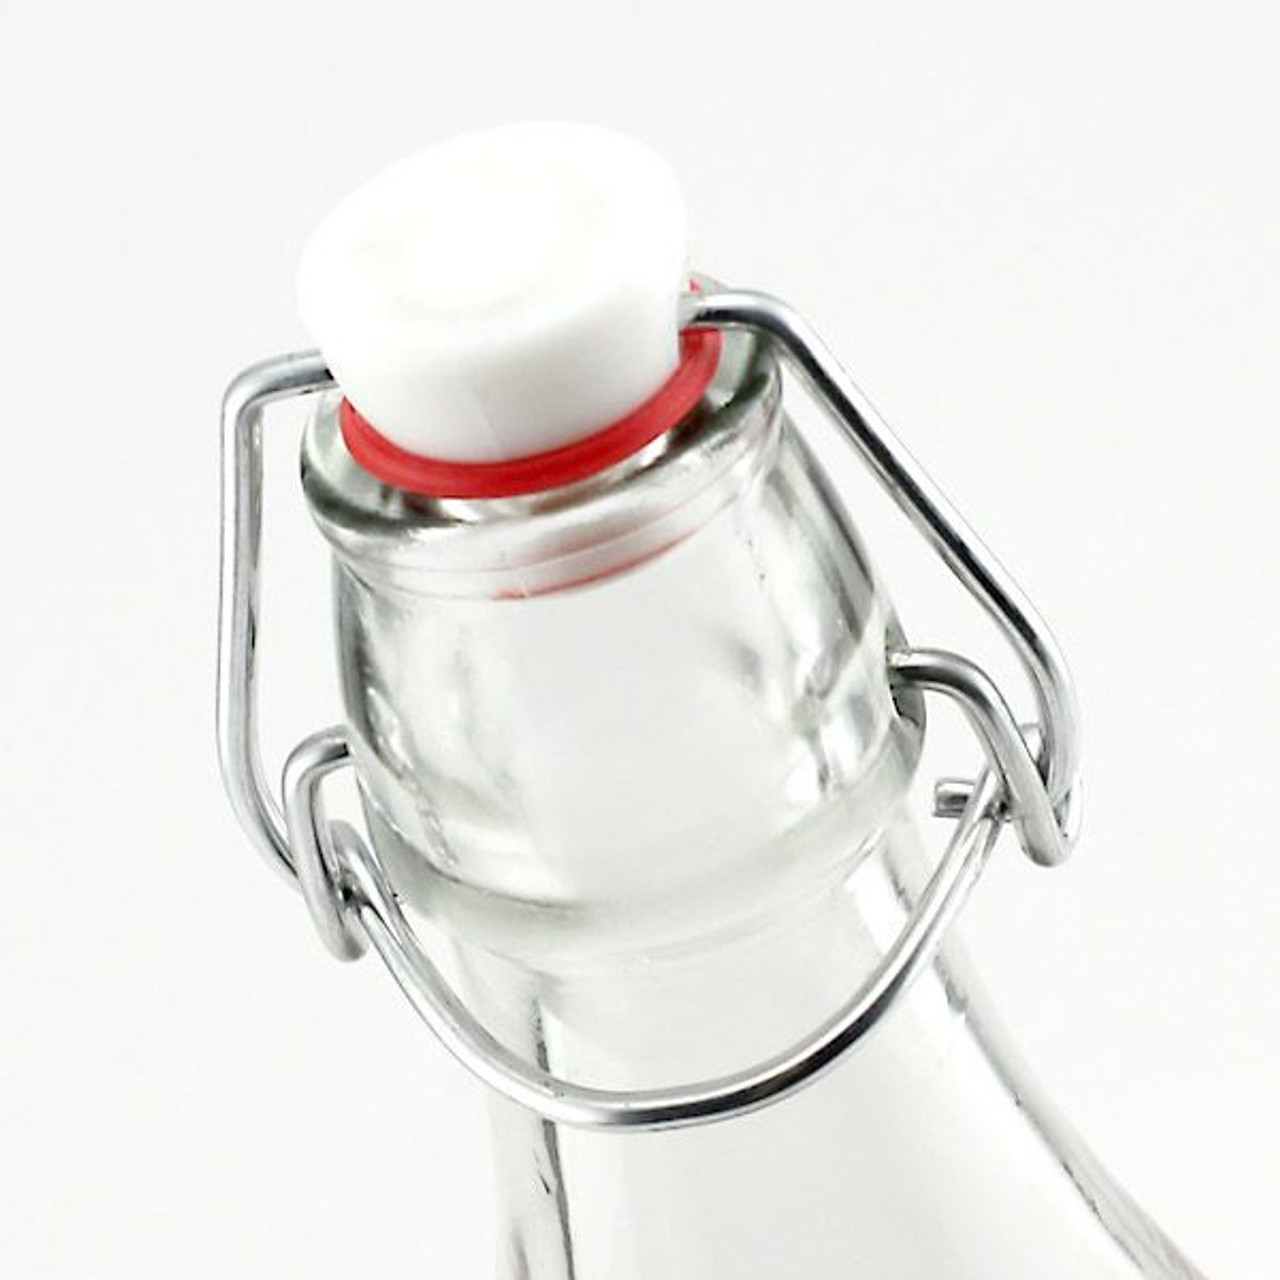 1 Liter (34 oz) Clear Giara Glass Bottle with Swing Top